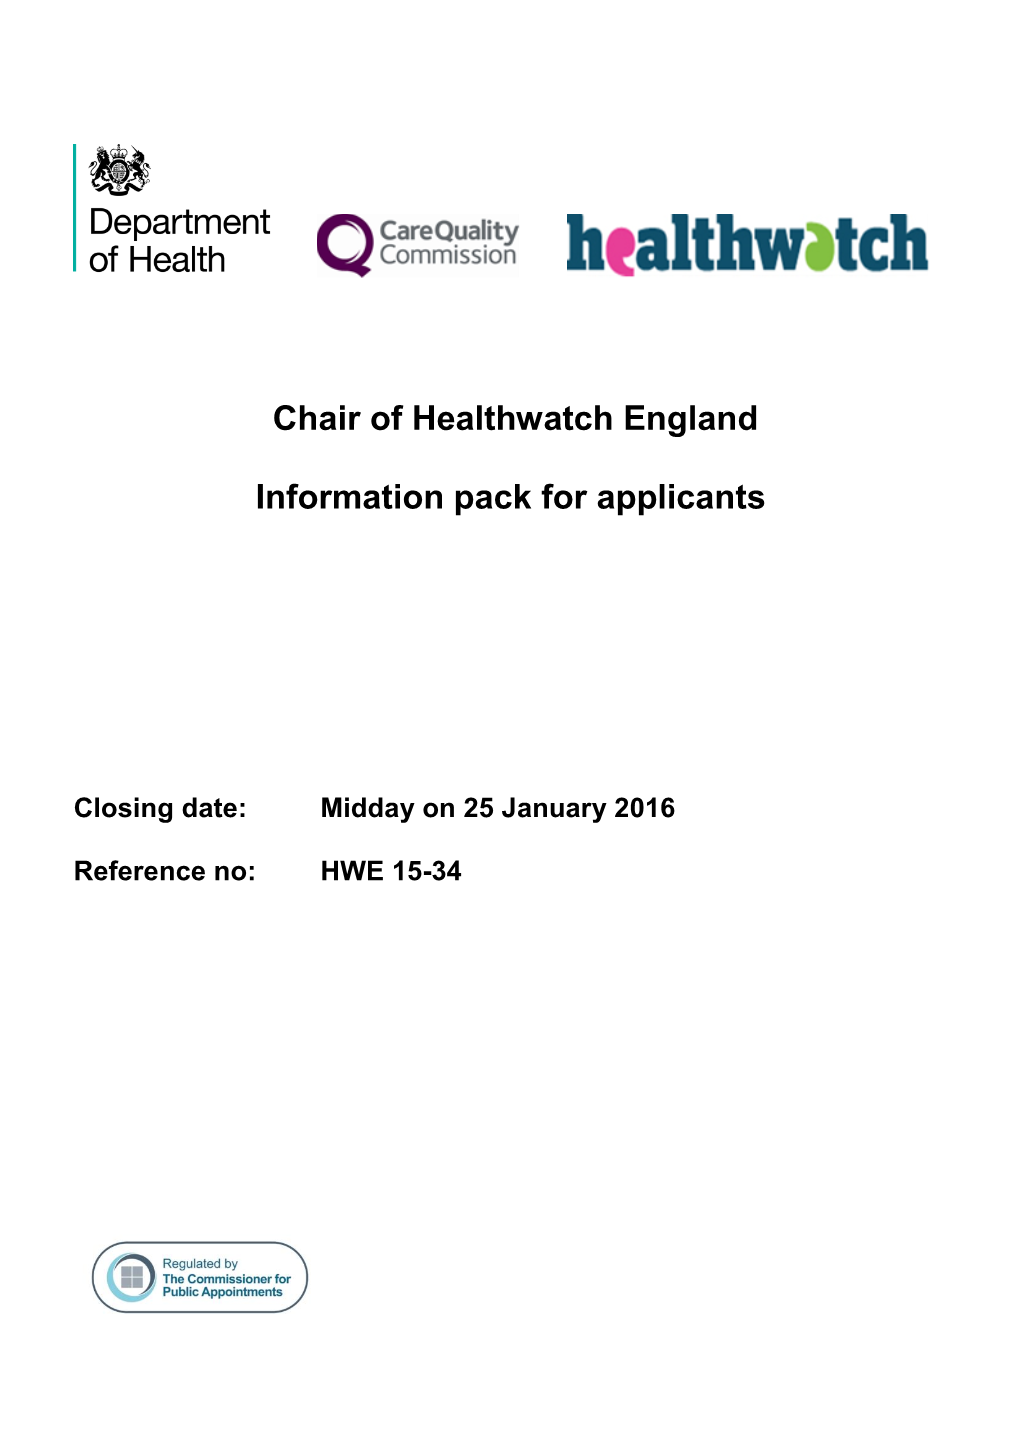 Chair of Healthwatch England Information Pack for Applicants